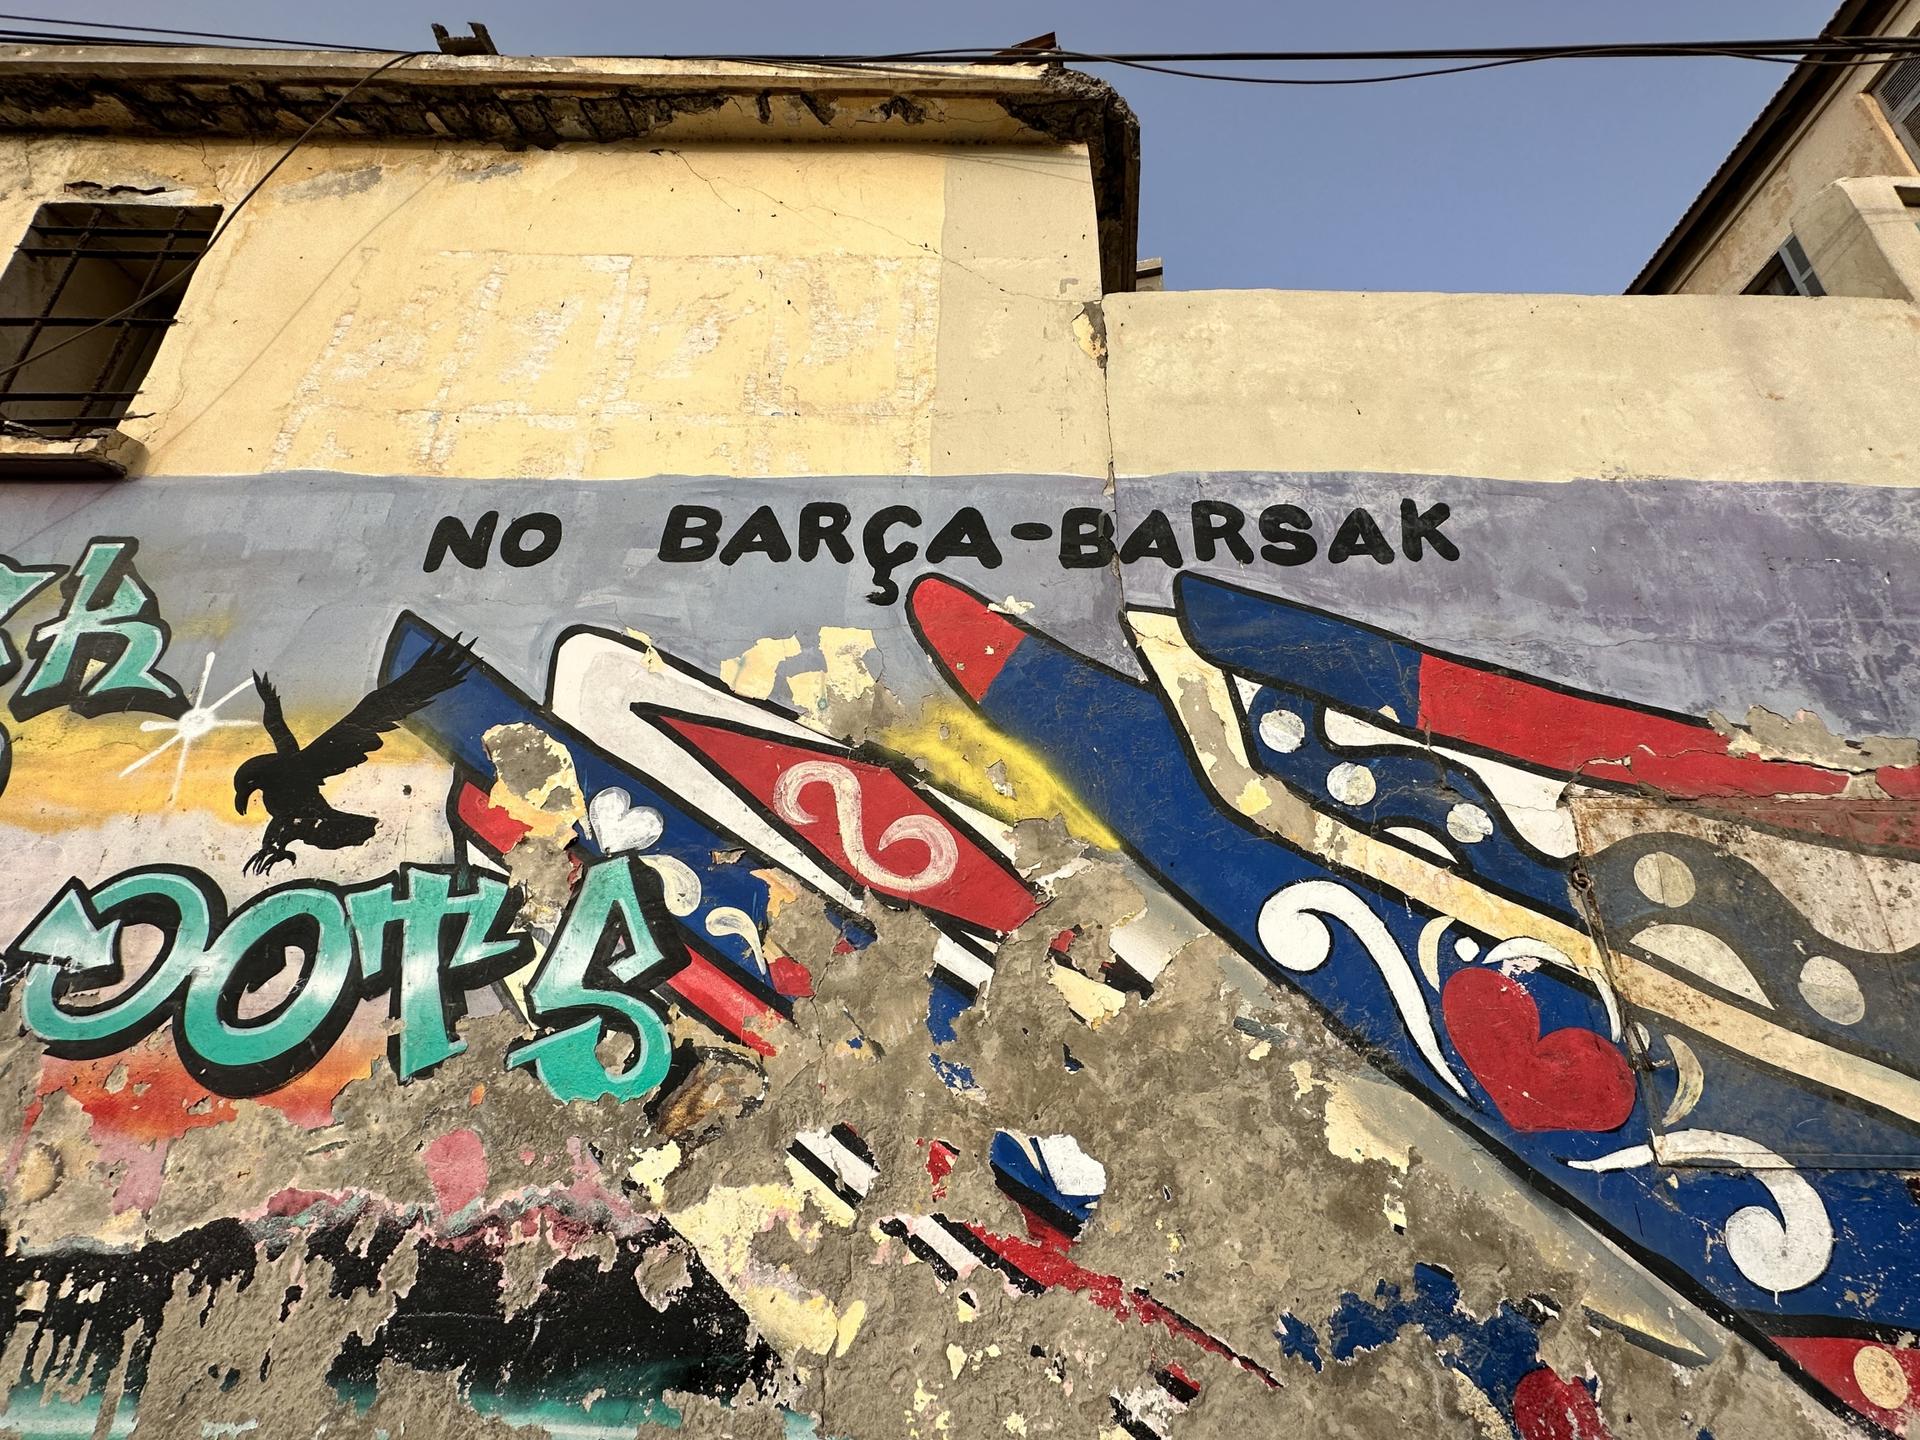 Many young people in Saint-Louis have decided to leave for Europe by sea. "No Barca-Barsak" is a common phrase written on walls and ships in the fishing village of Guet Ndar.